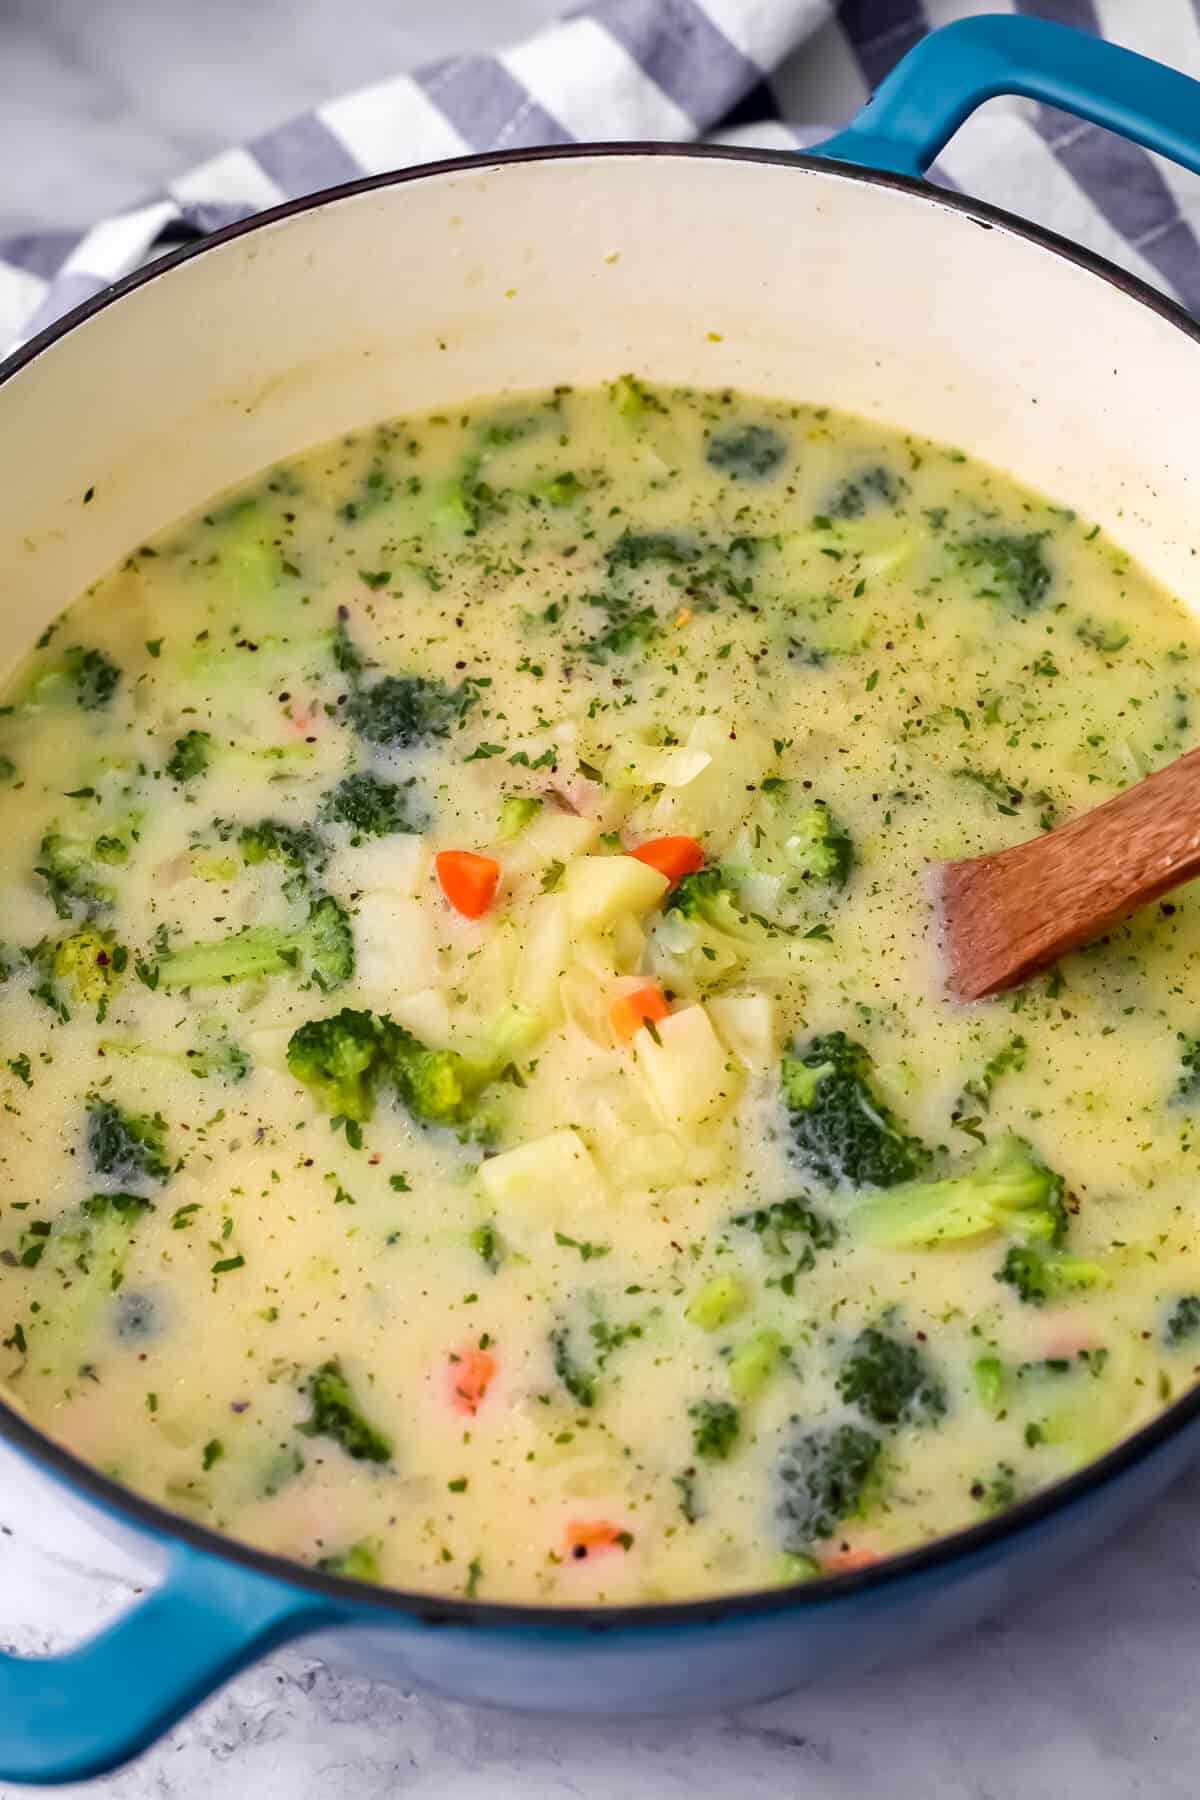 Vegan broccoli potato soup before the broth has been thickened.